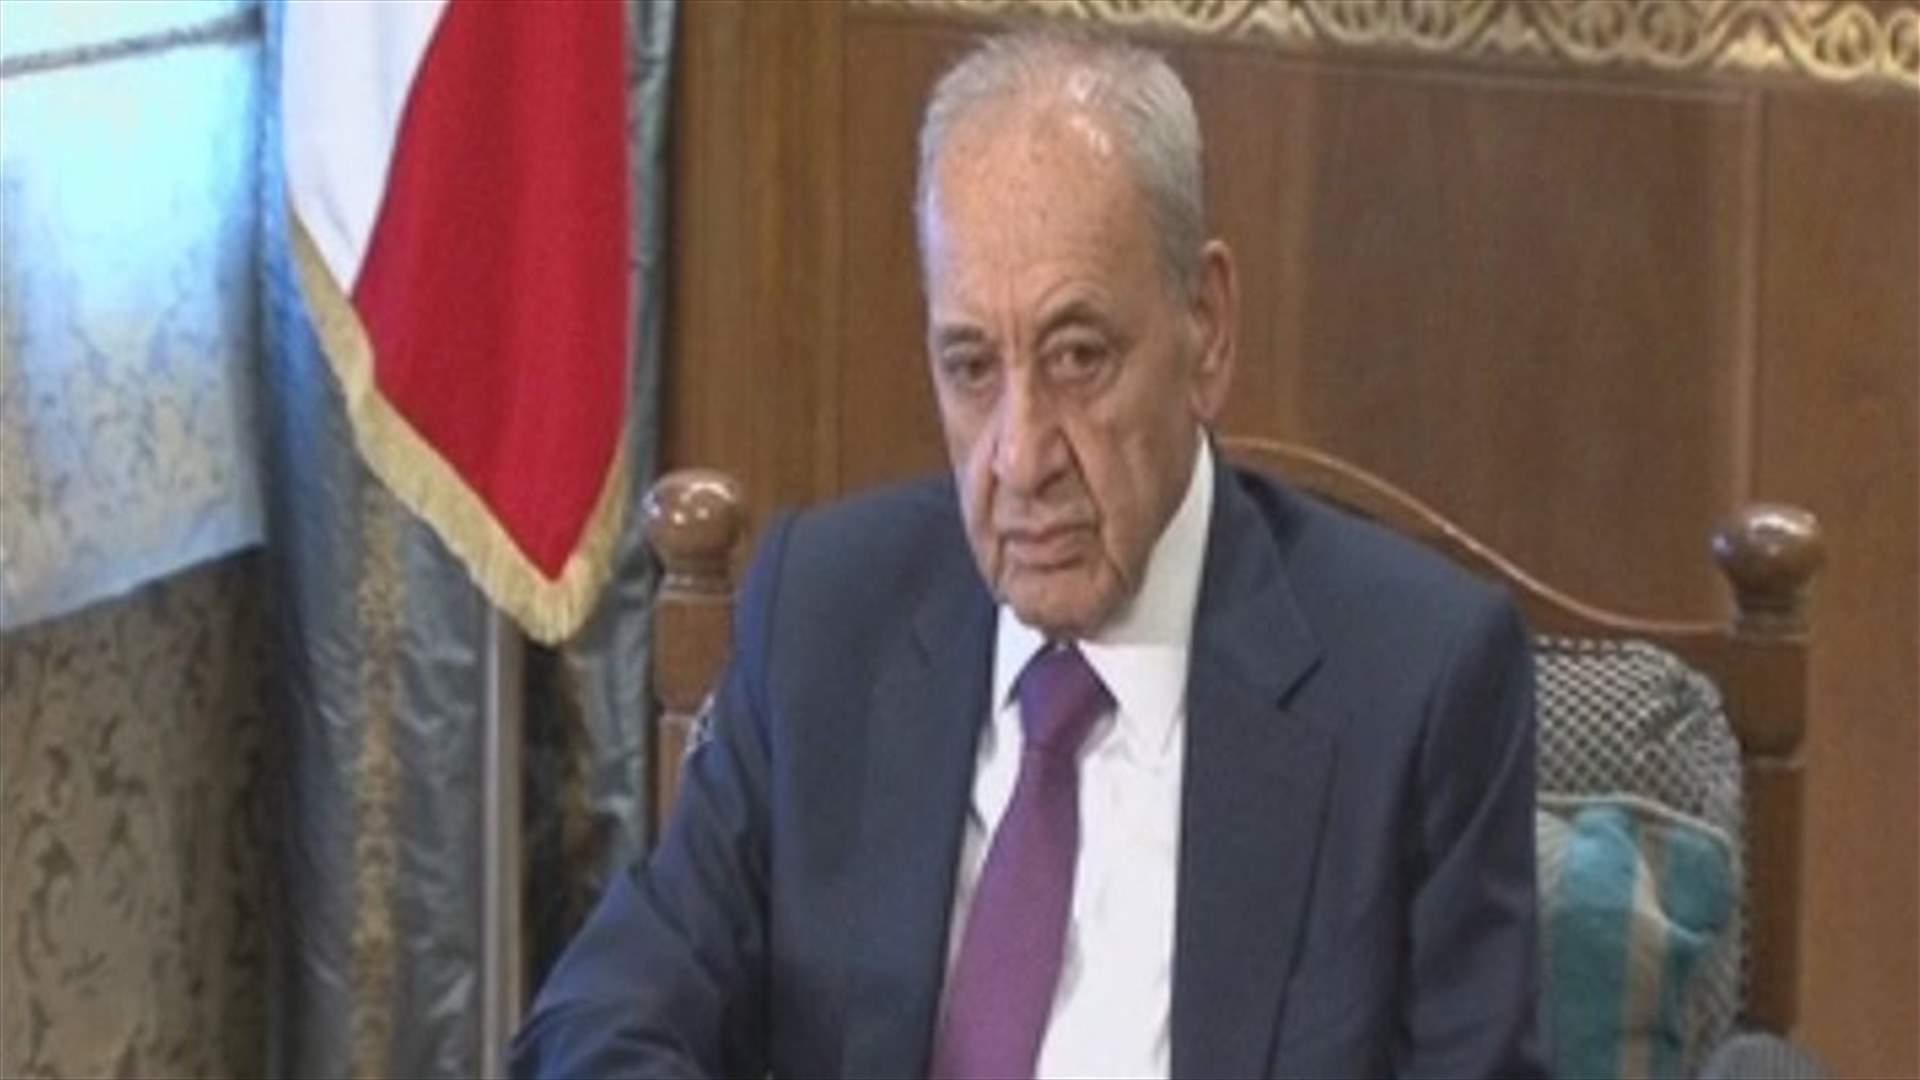 Berri confirms measures will not affect low-income employees